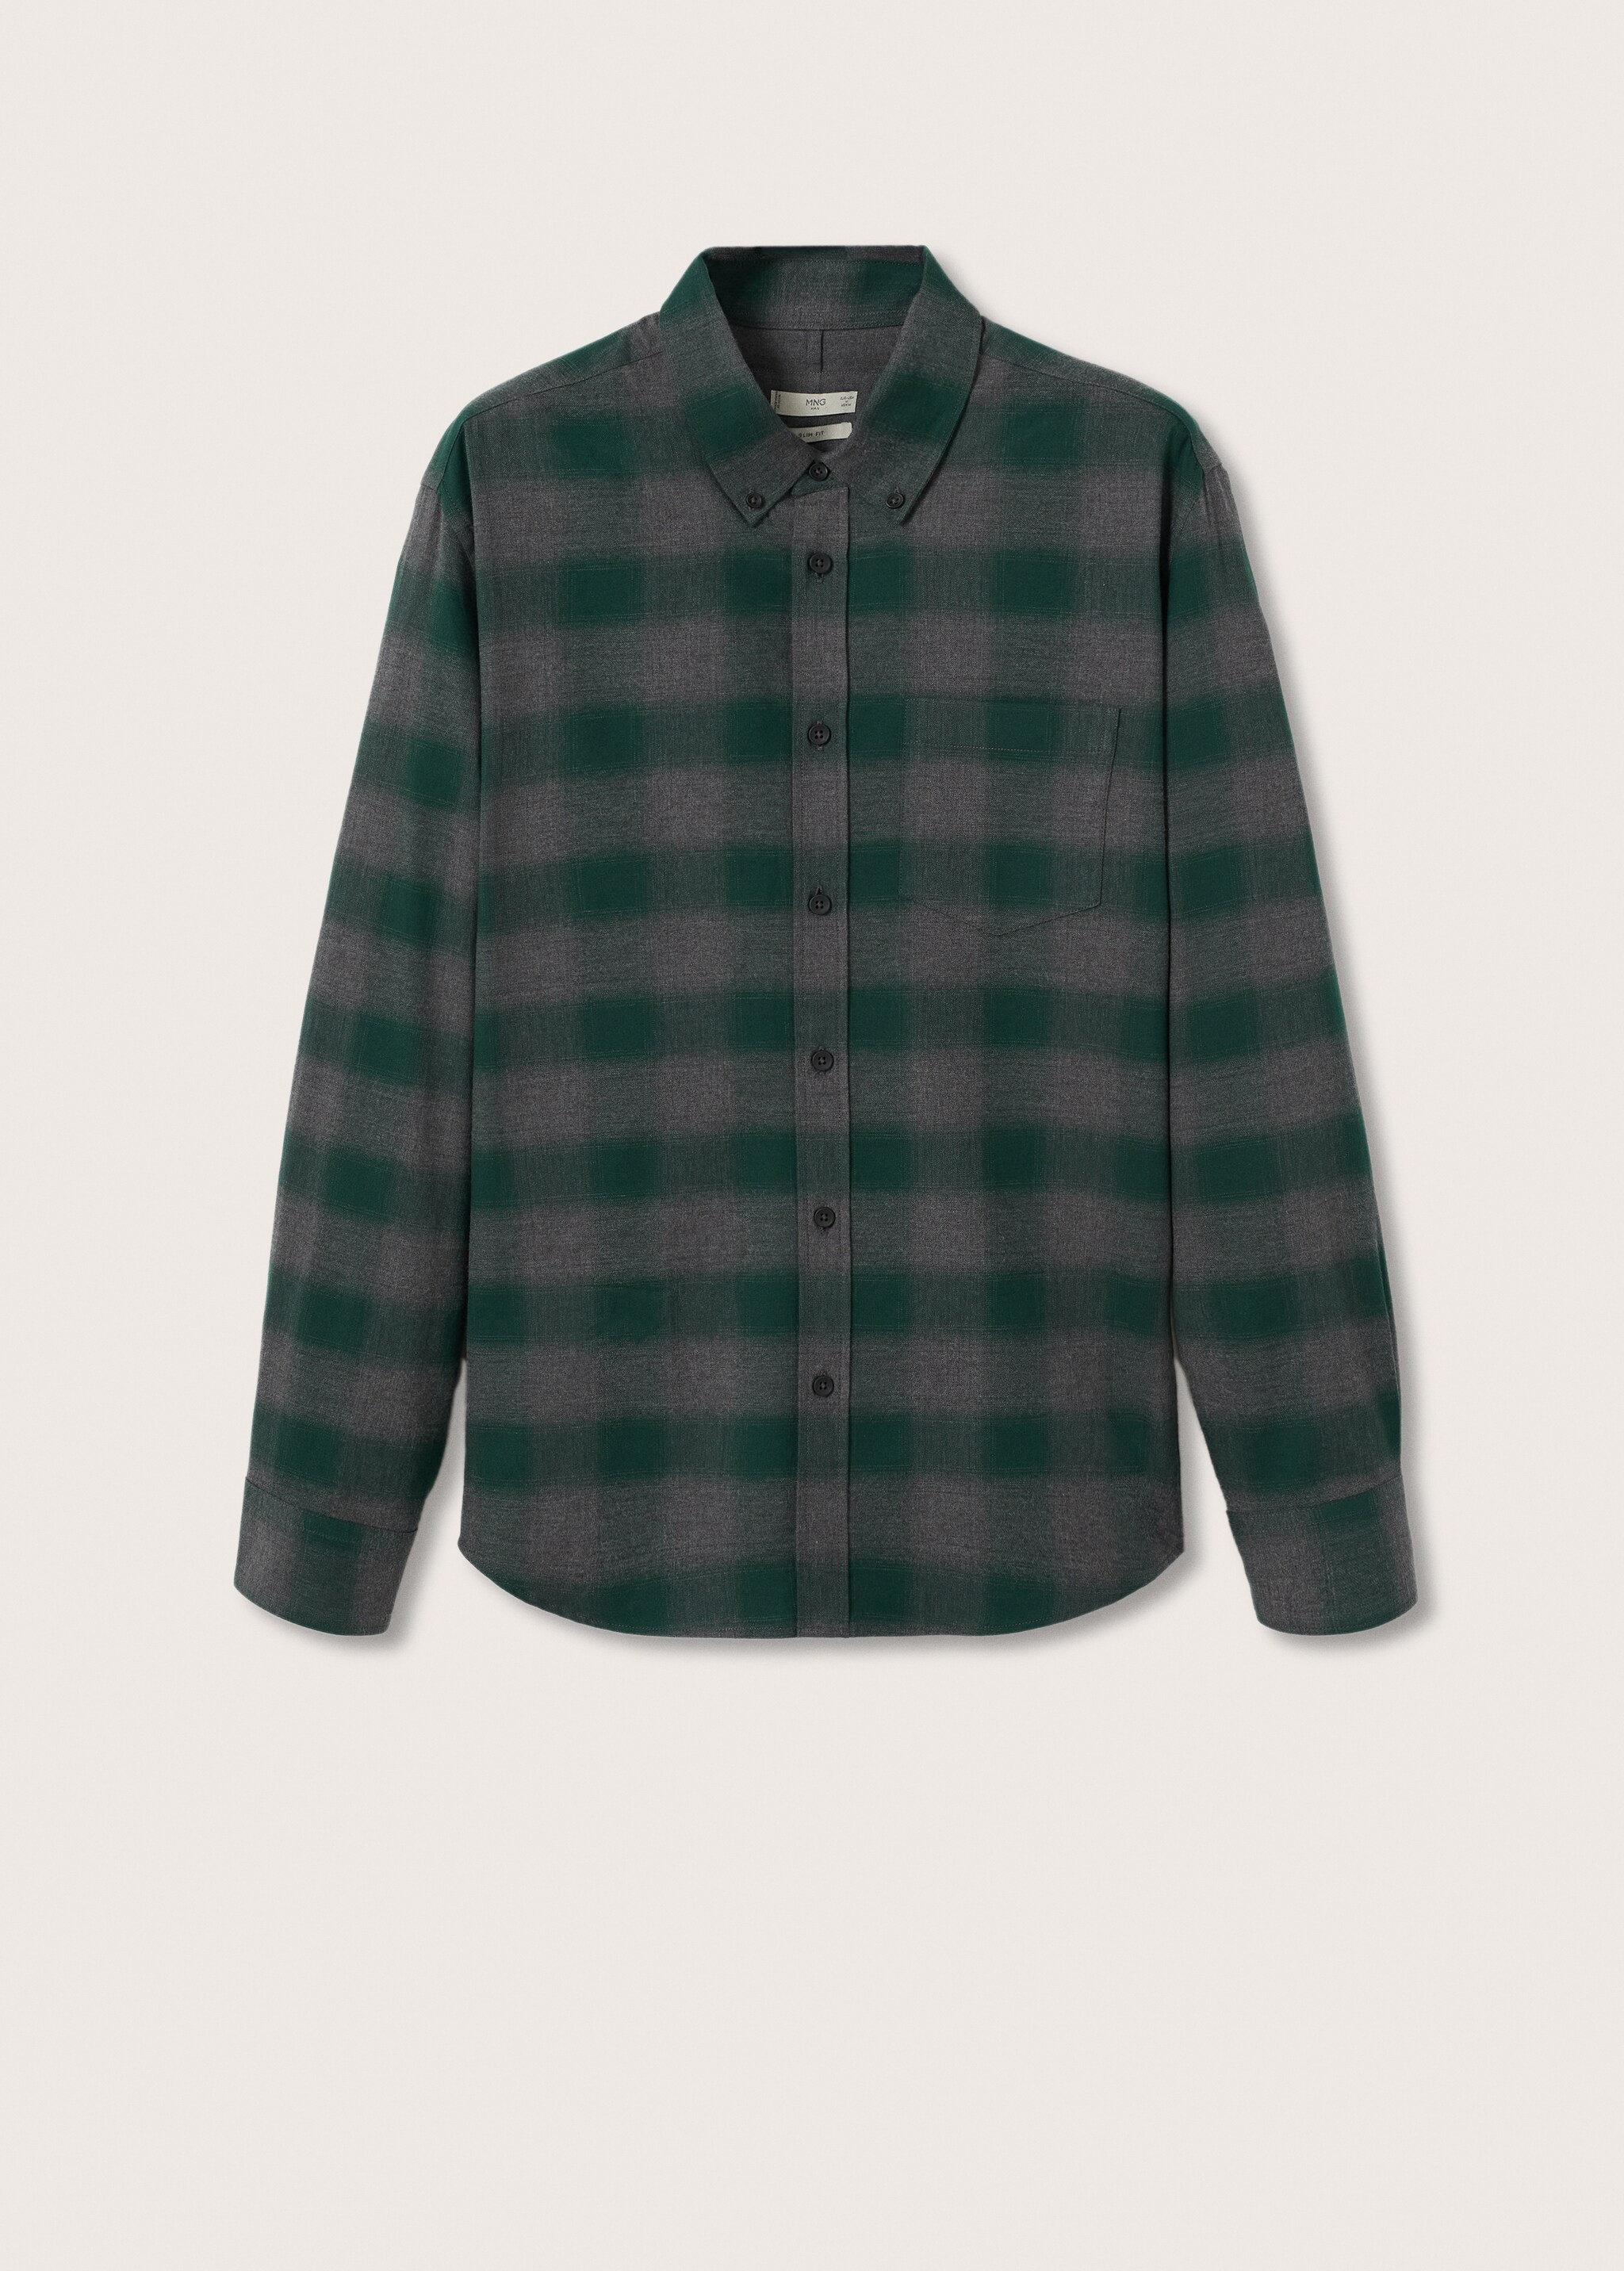 Checked flannel shirt - Article without model